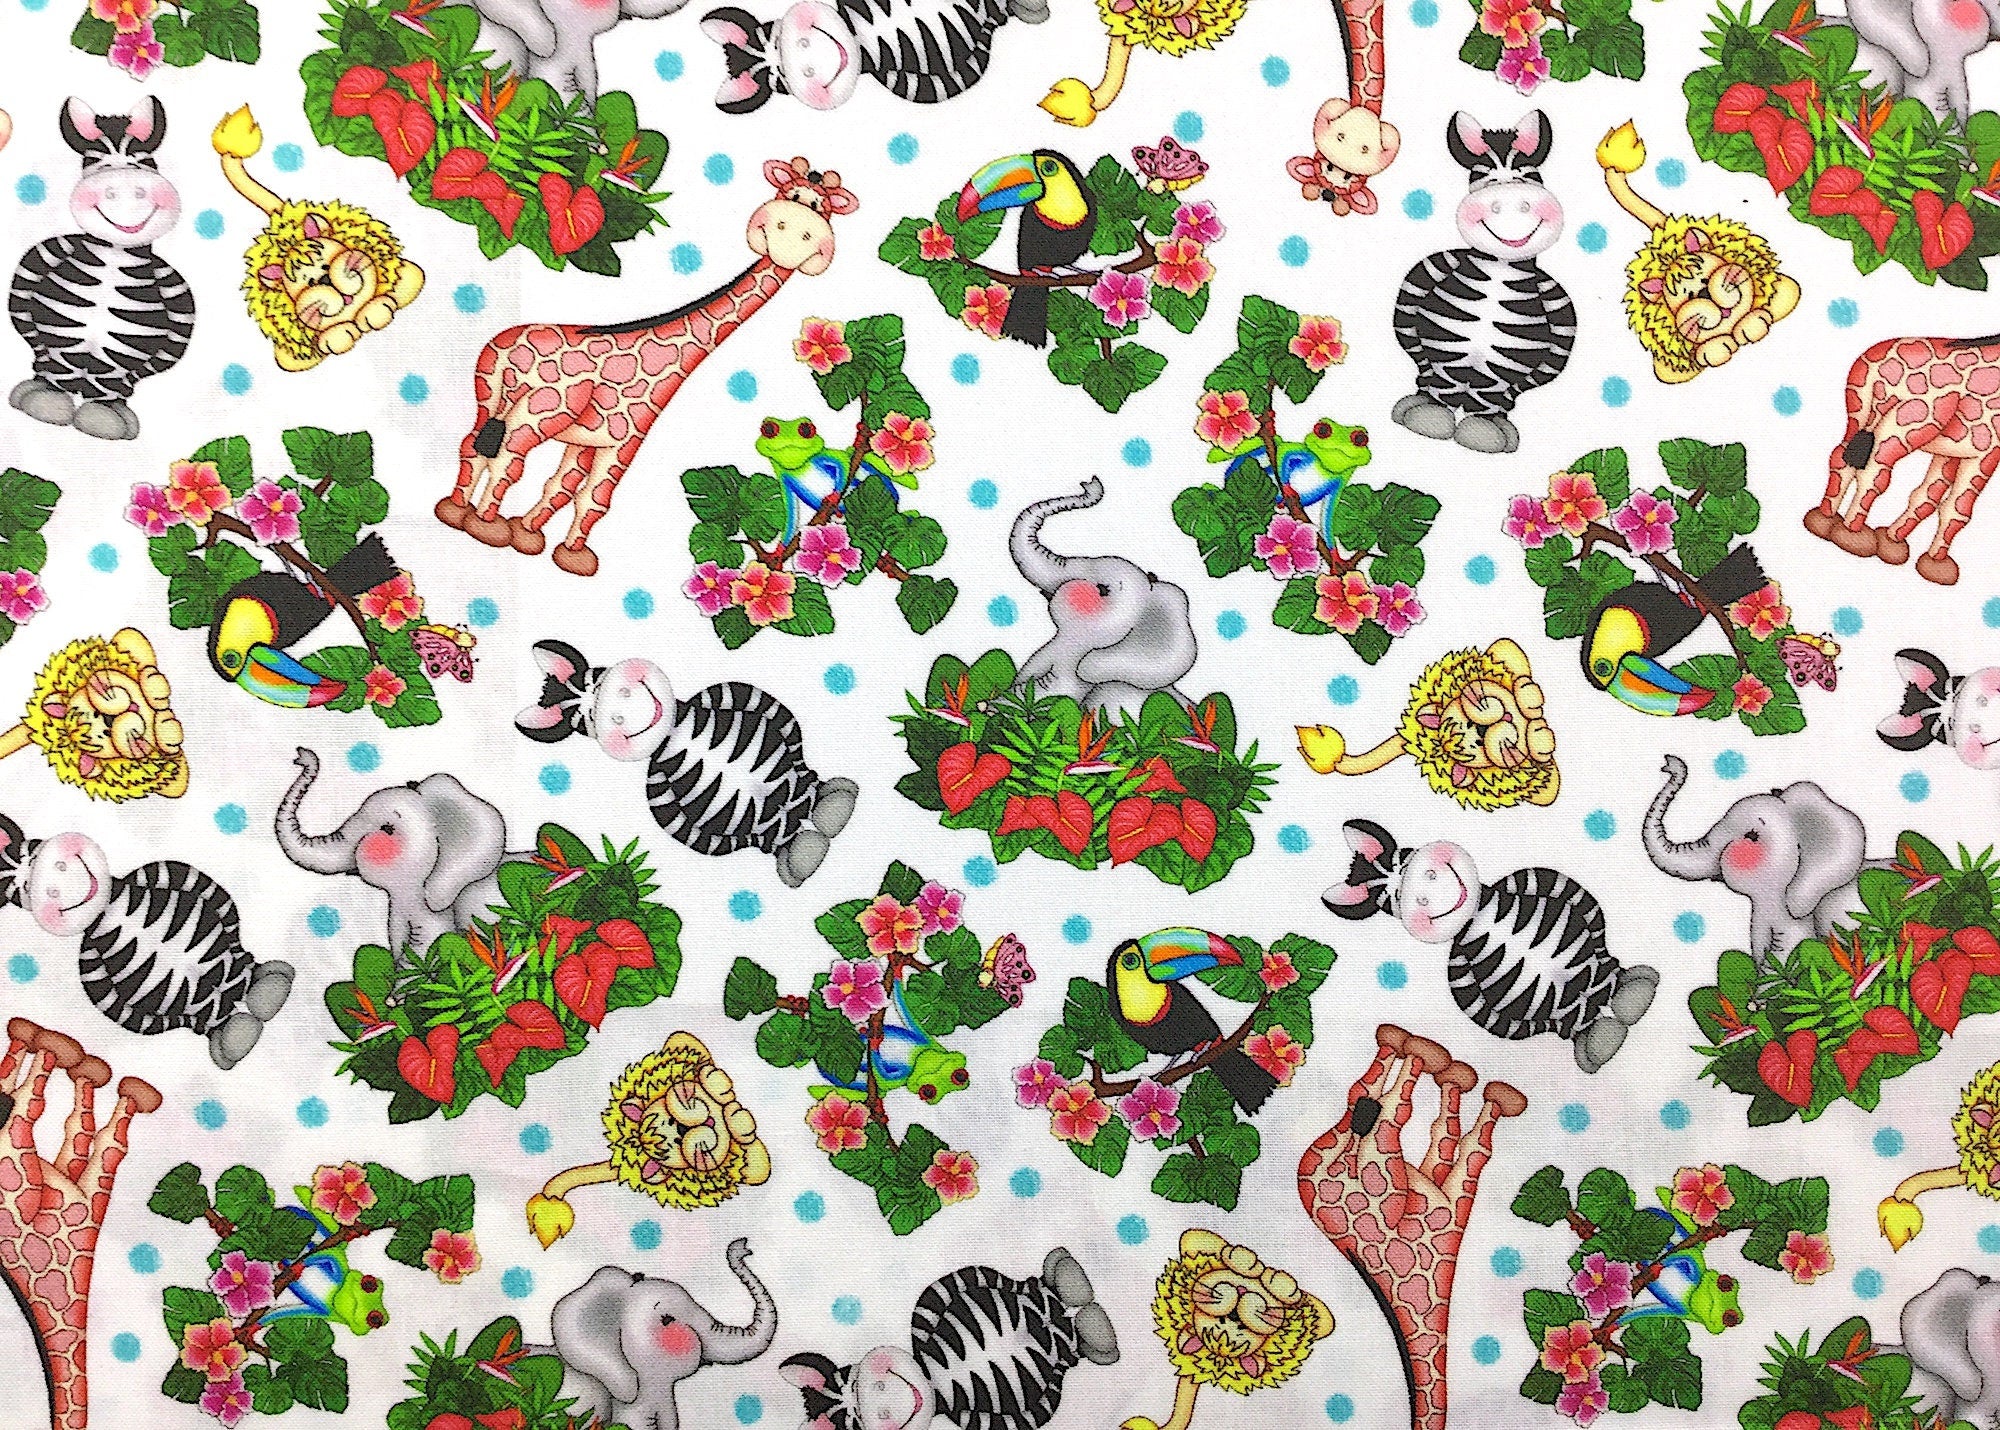 This fabric is called Bazoople Tossed Animal and has zebras, tigers, elephants, plants and more on a white background.